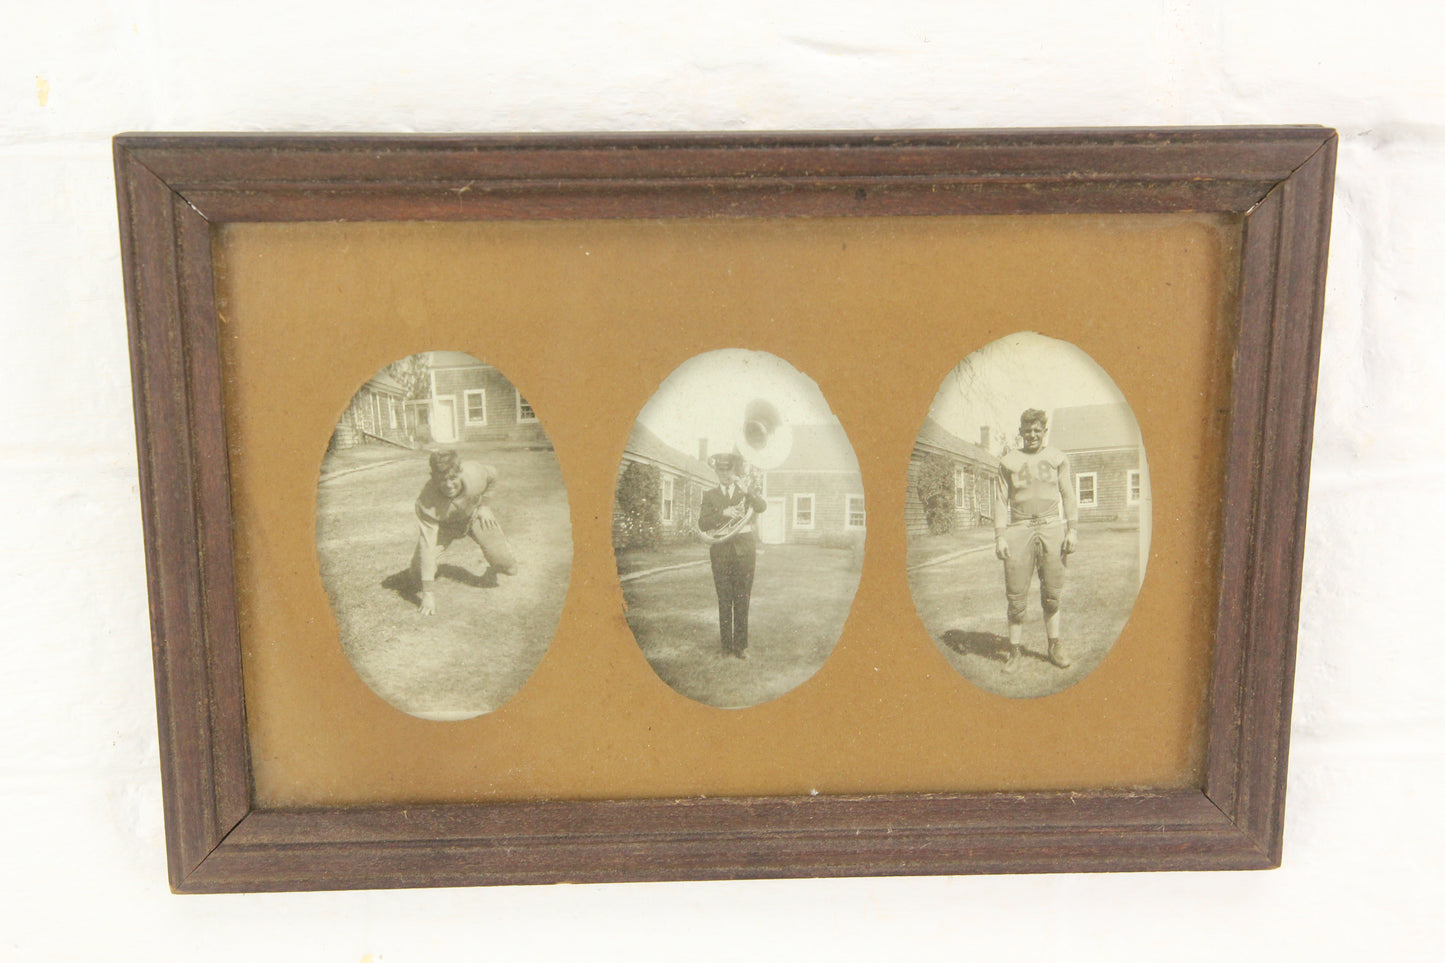 Triptych Framed Photographs of a Young Football Player and Band Member - 9 x 6"